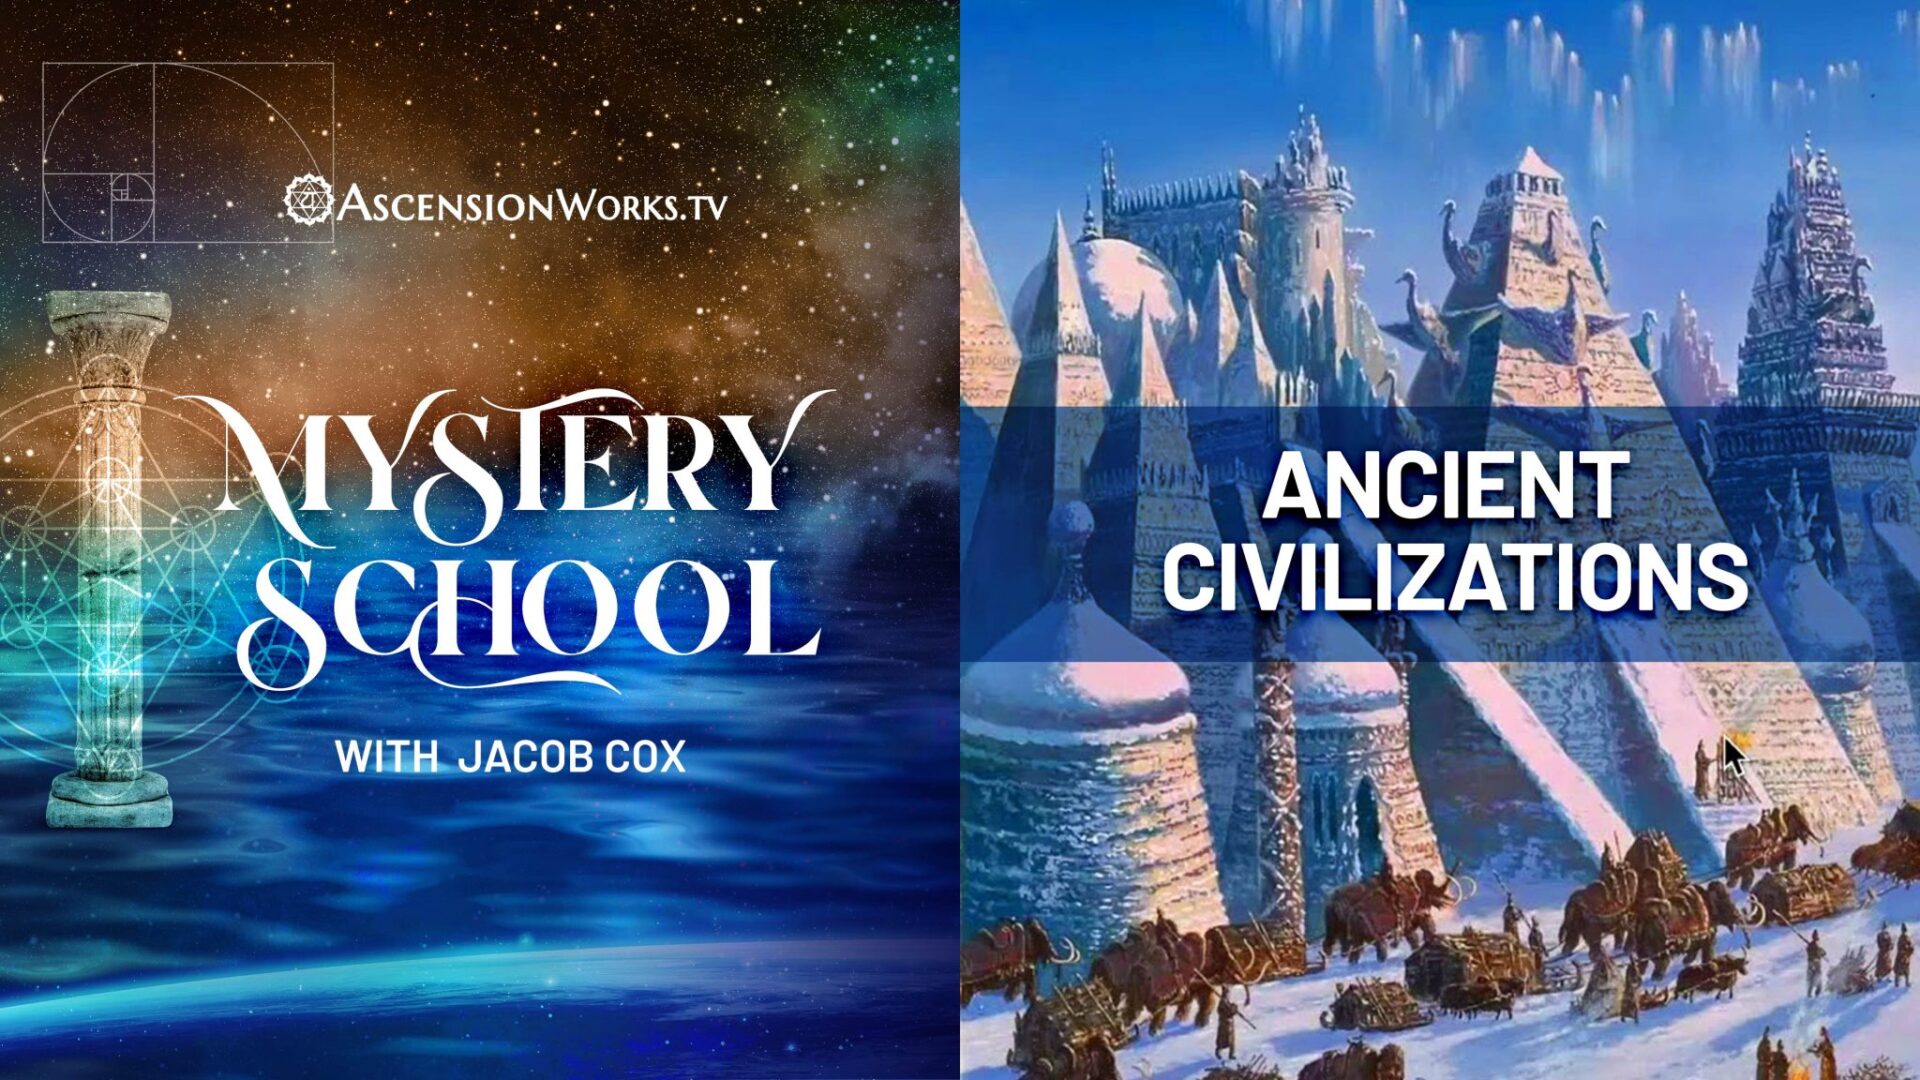 Mystery School with Jacob Cox - Ancient Civilizations